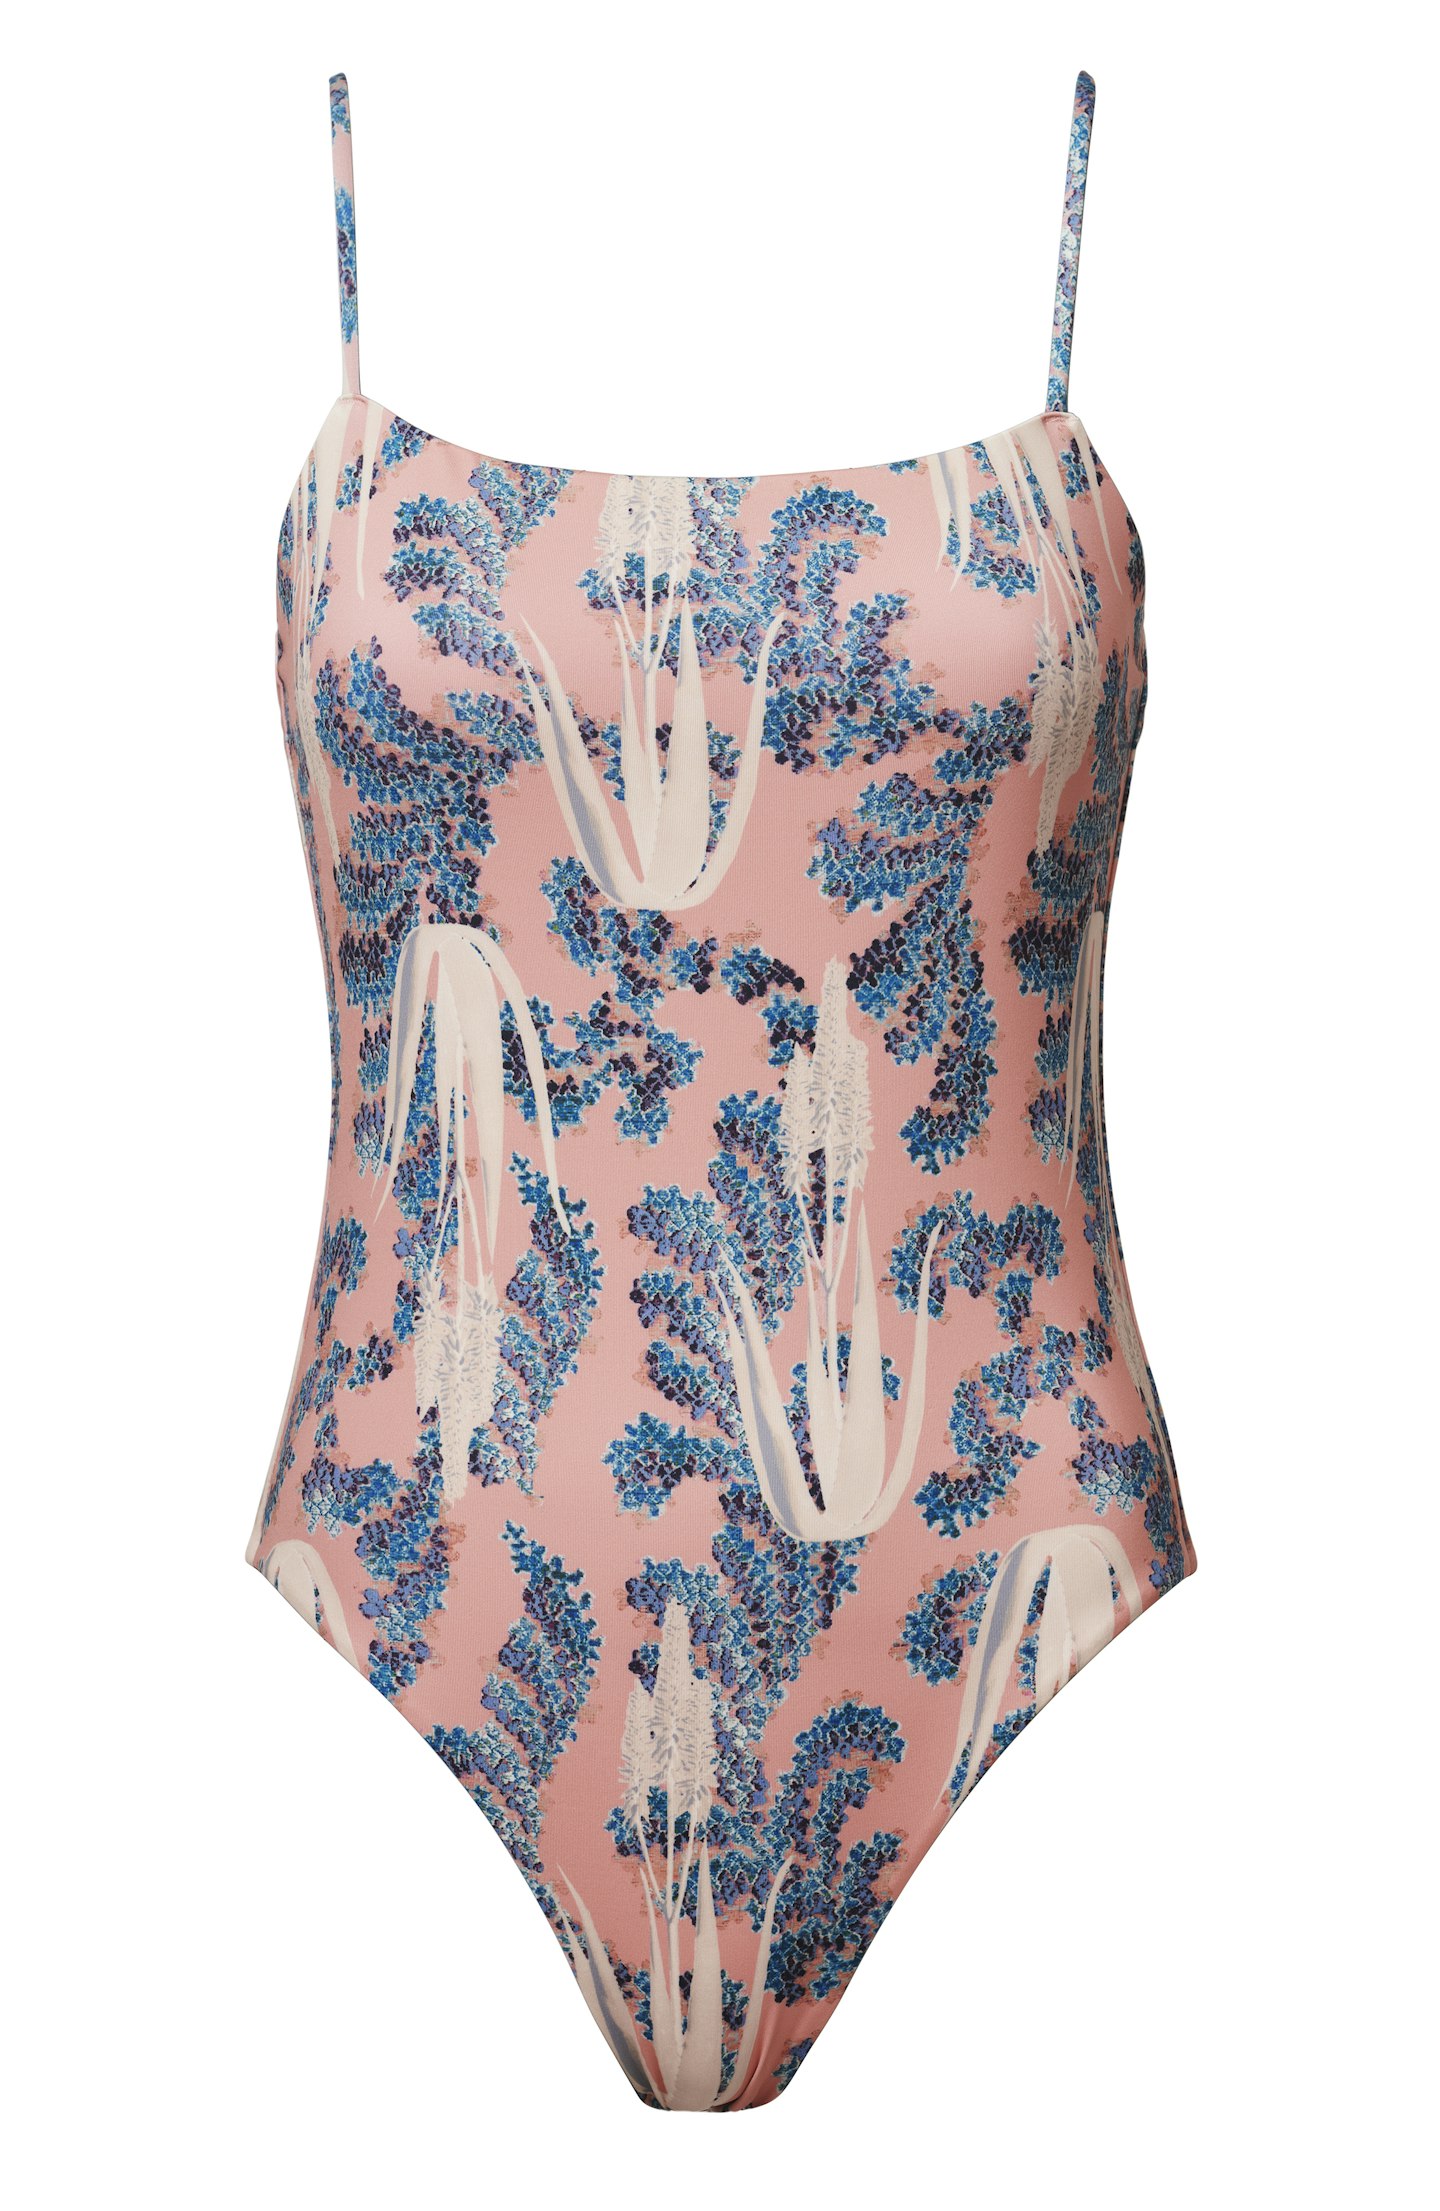 Patterned Swimsuit, £34.99